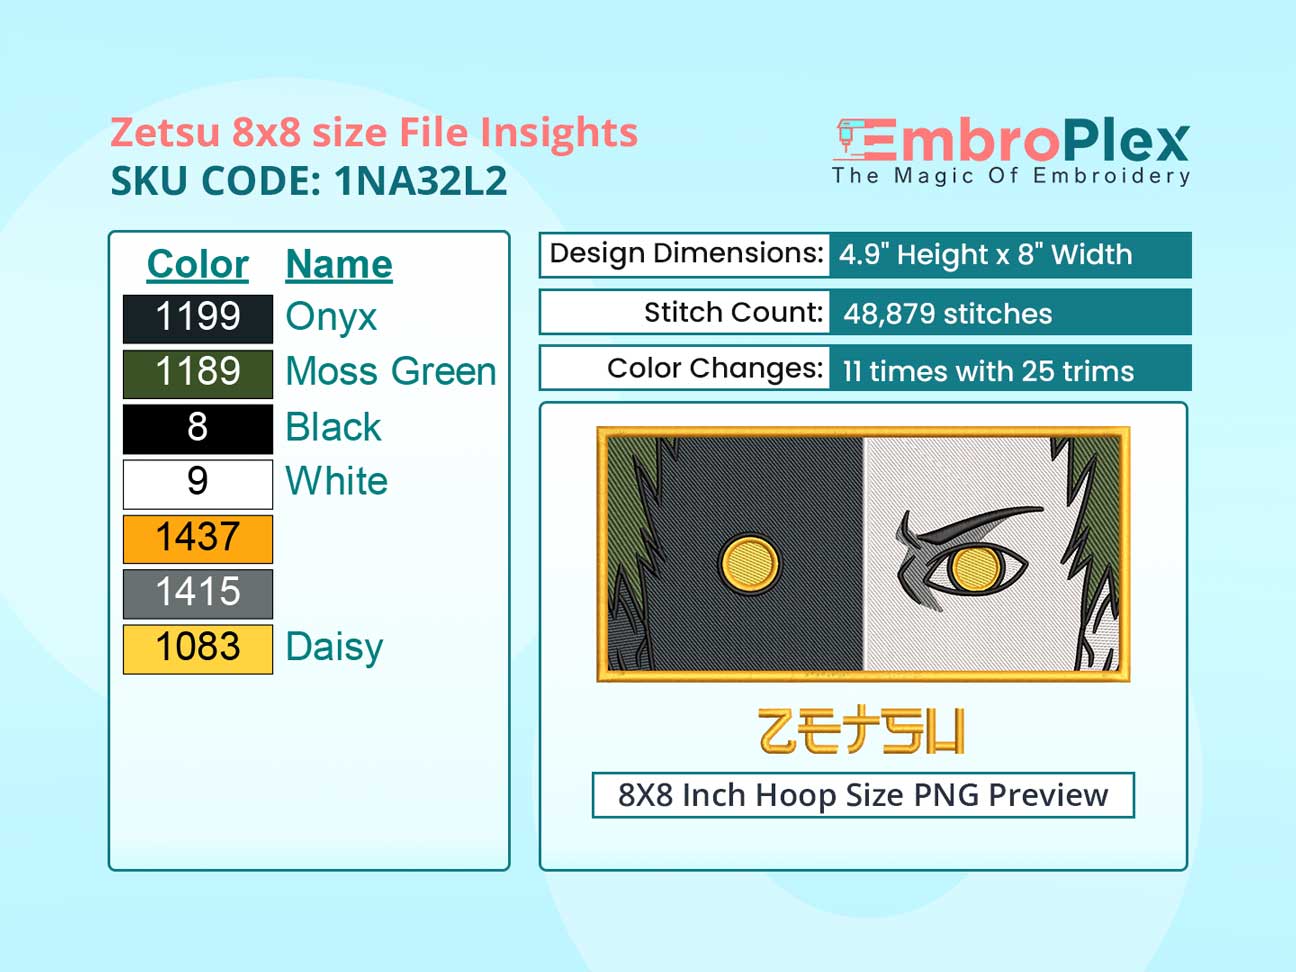 Anime-Inspired Zetsu Embroidery Design File - 8x8 Inch hoop Size Variation overview image